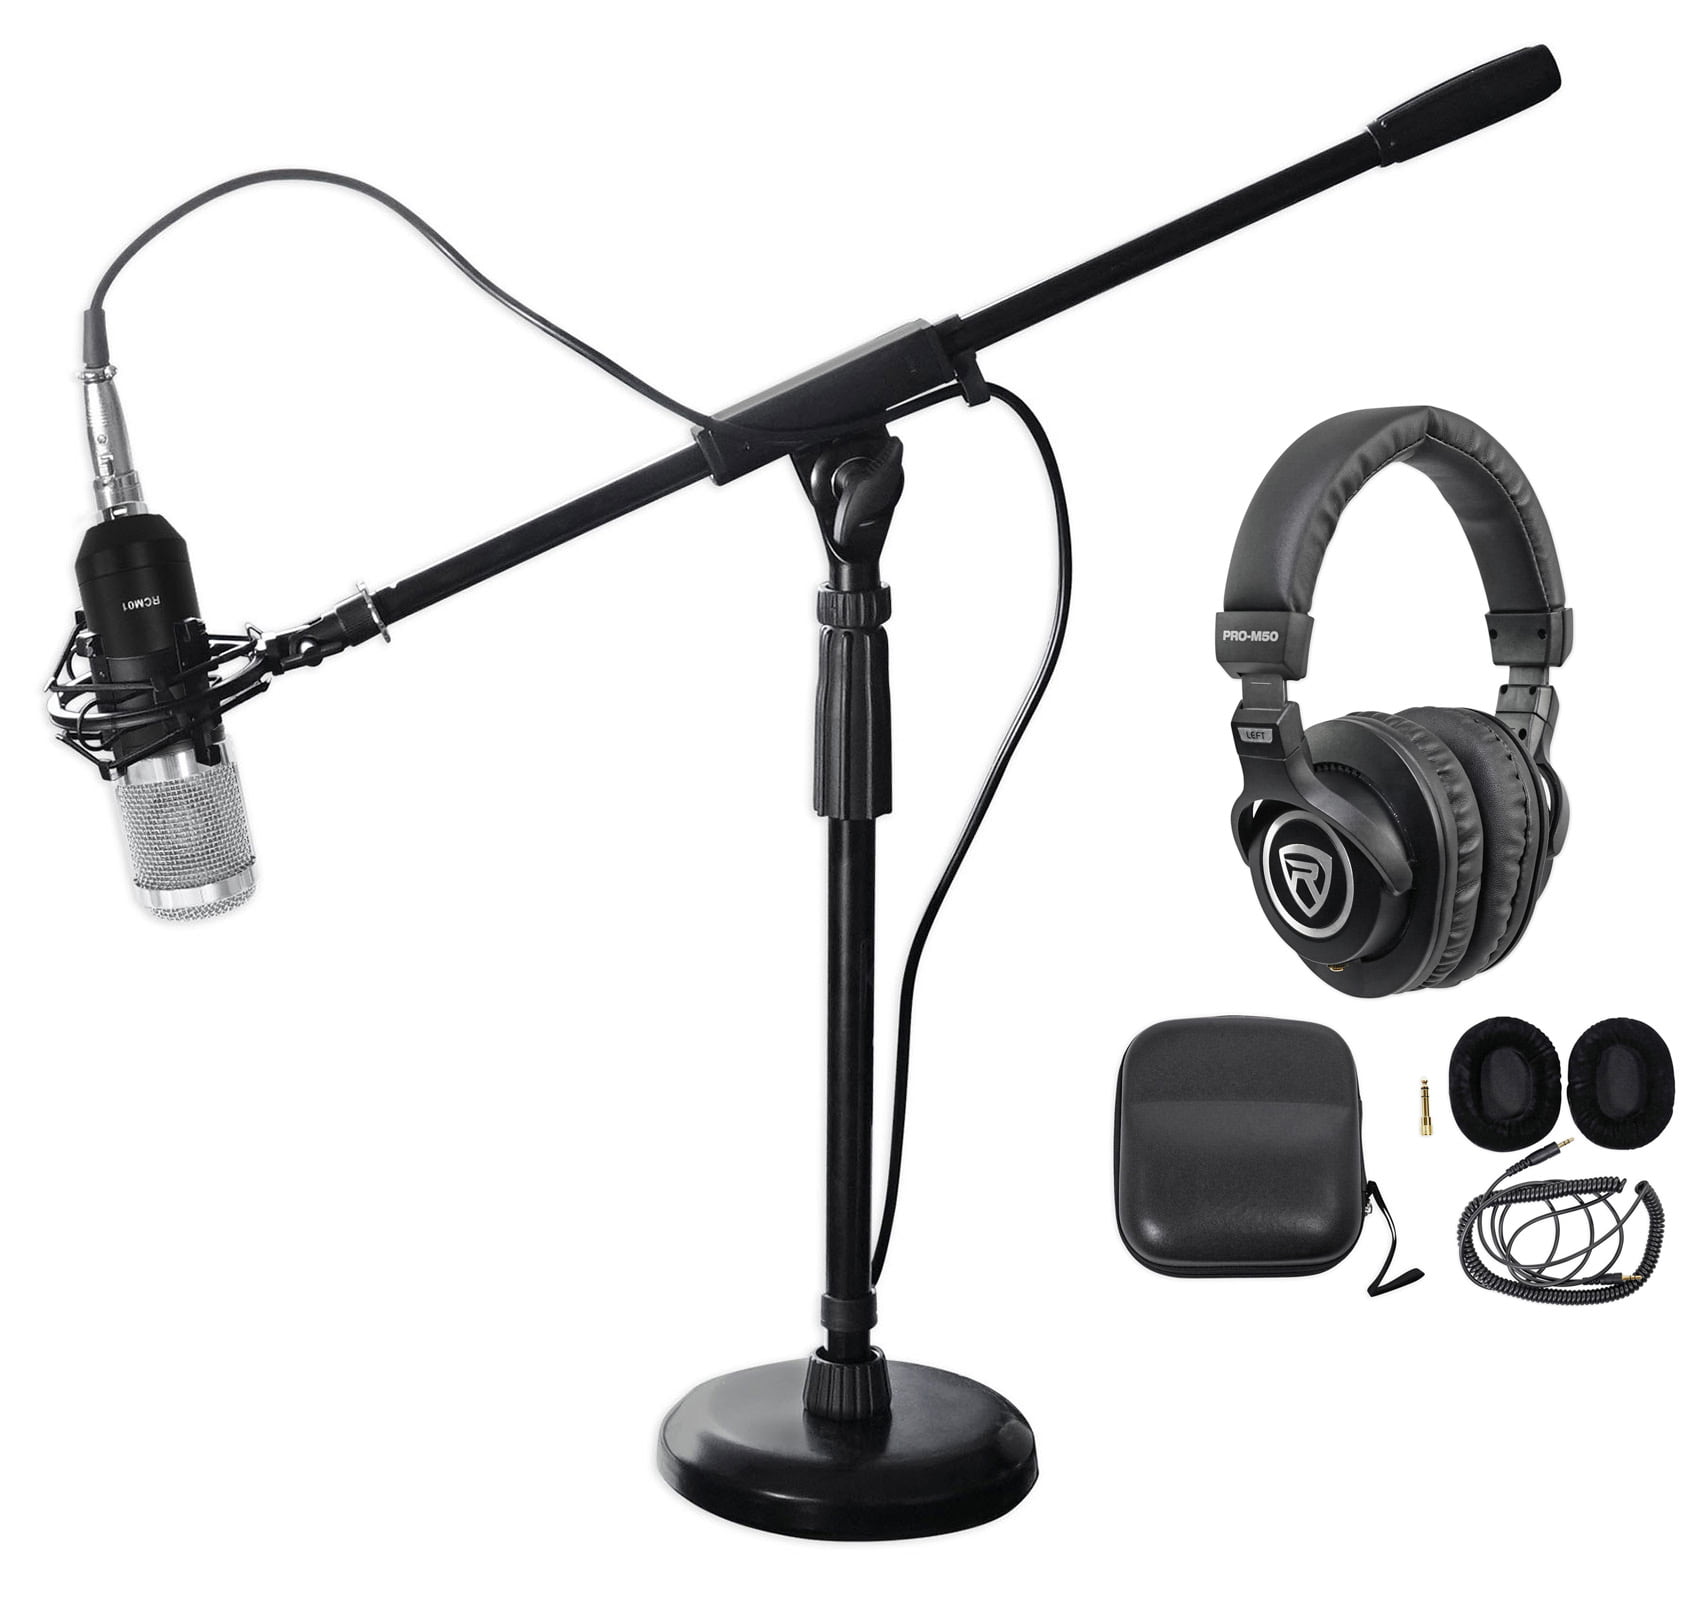 Rockville PC Gaming Streaming Twitch Bundle: RCM01 Microphone+Headphones+Stand  